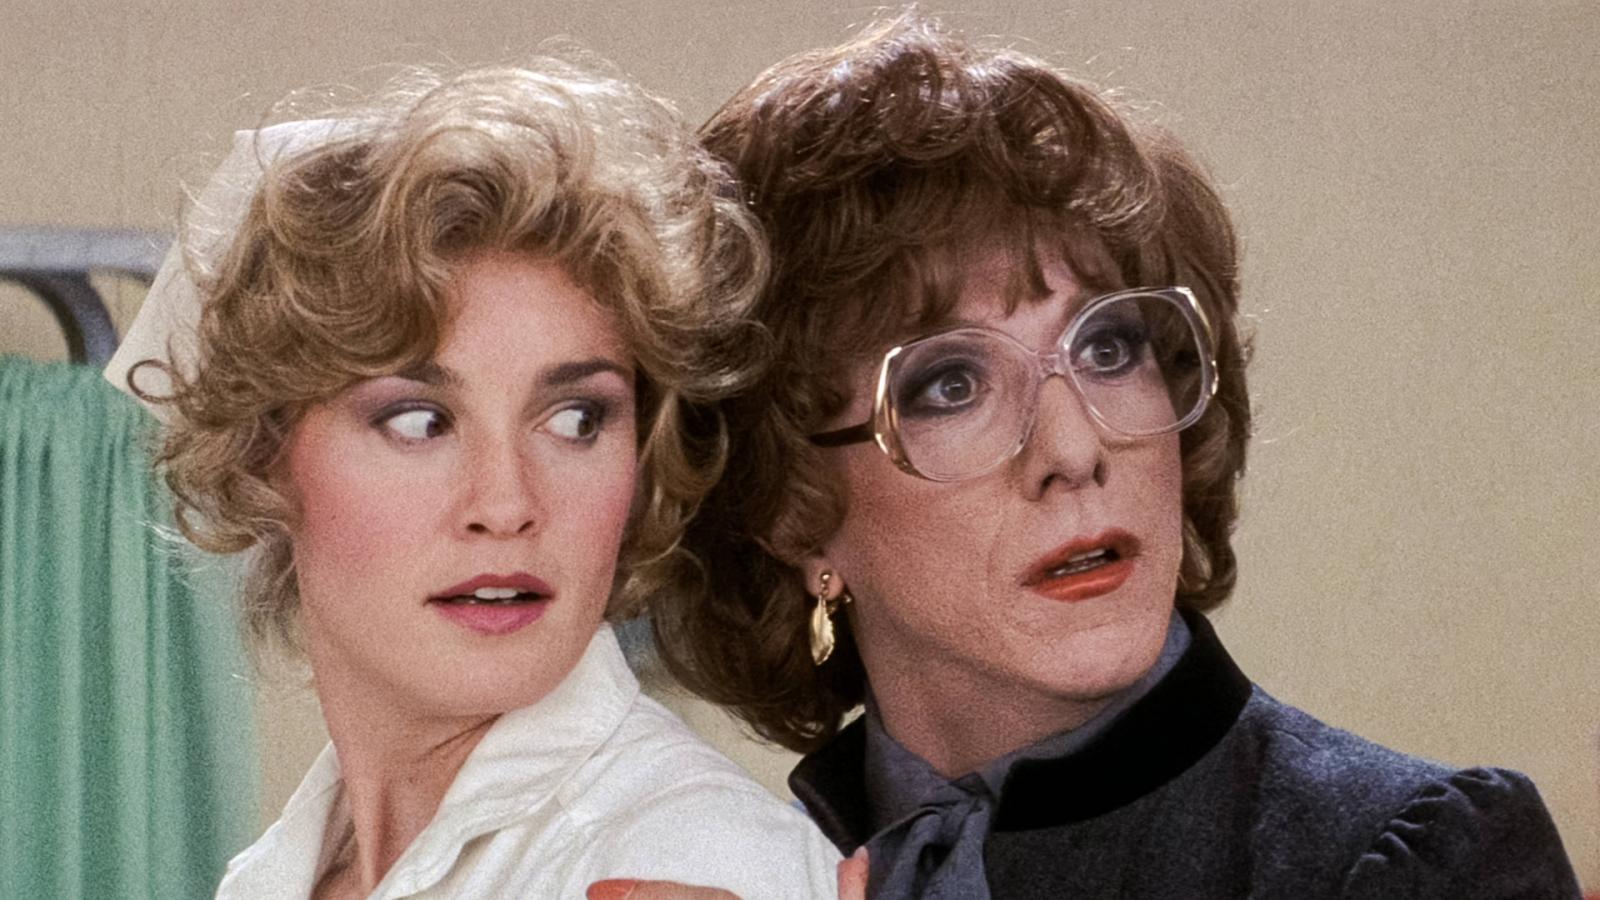 15 Classic Movies That Have Aged Terribly - image 12